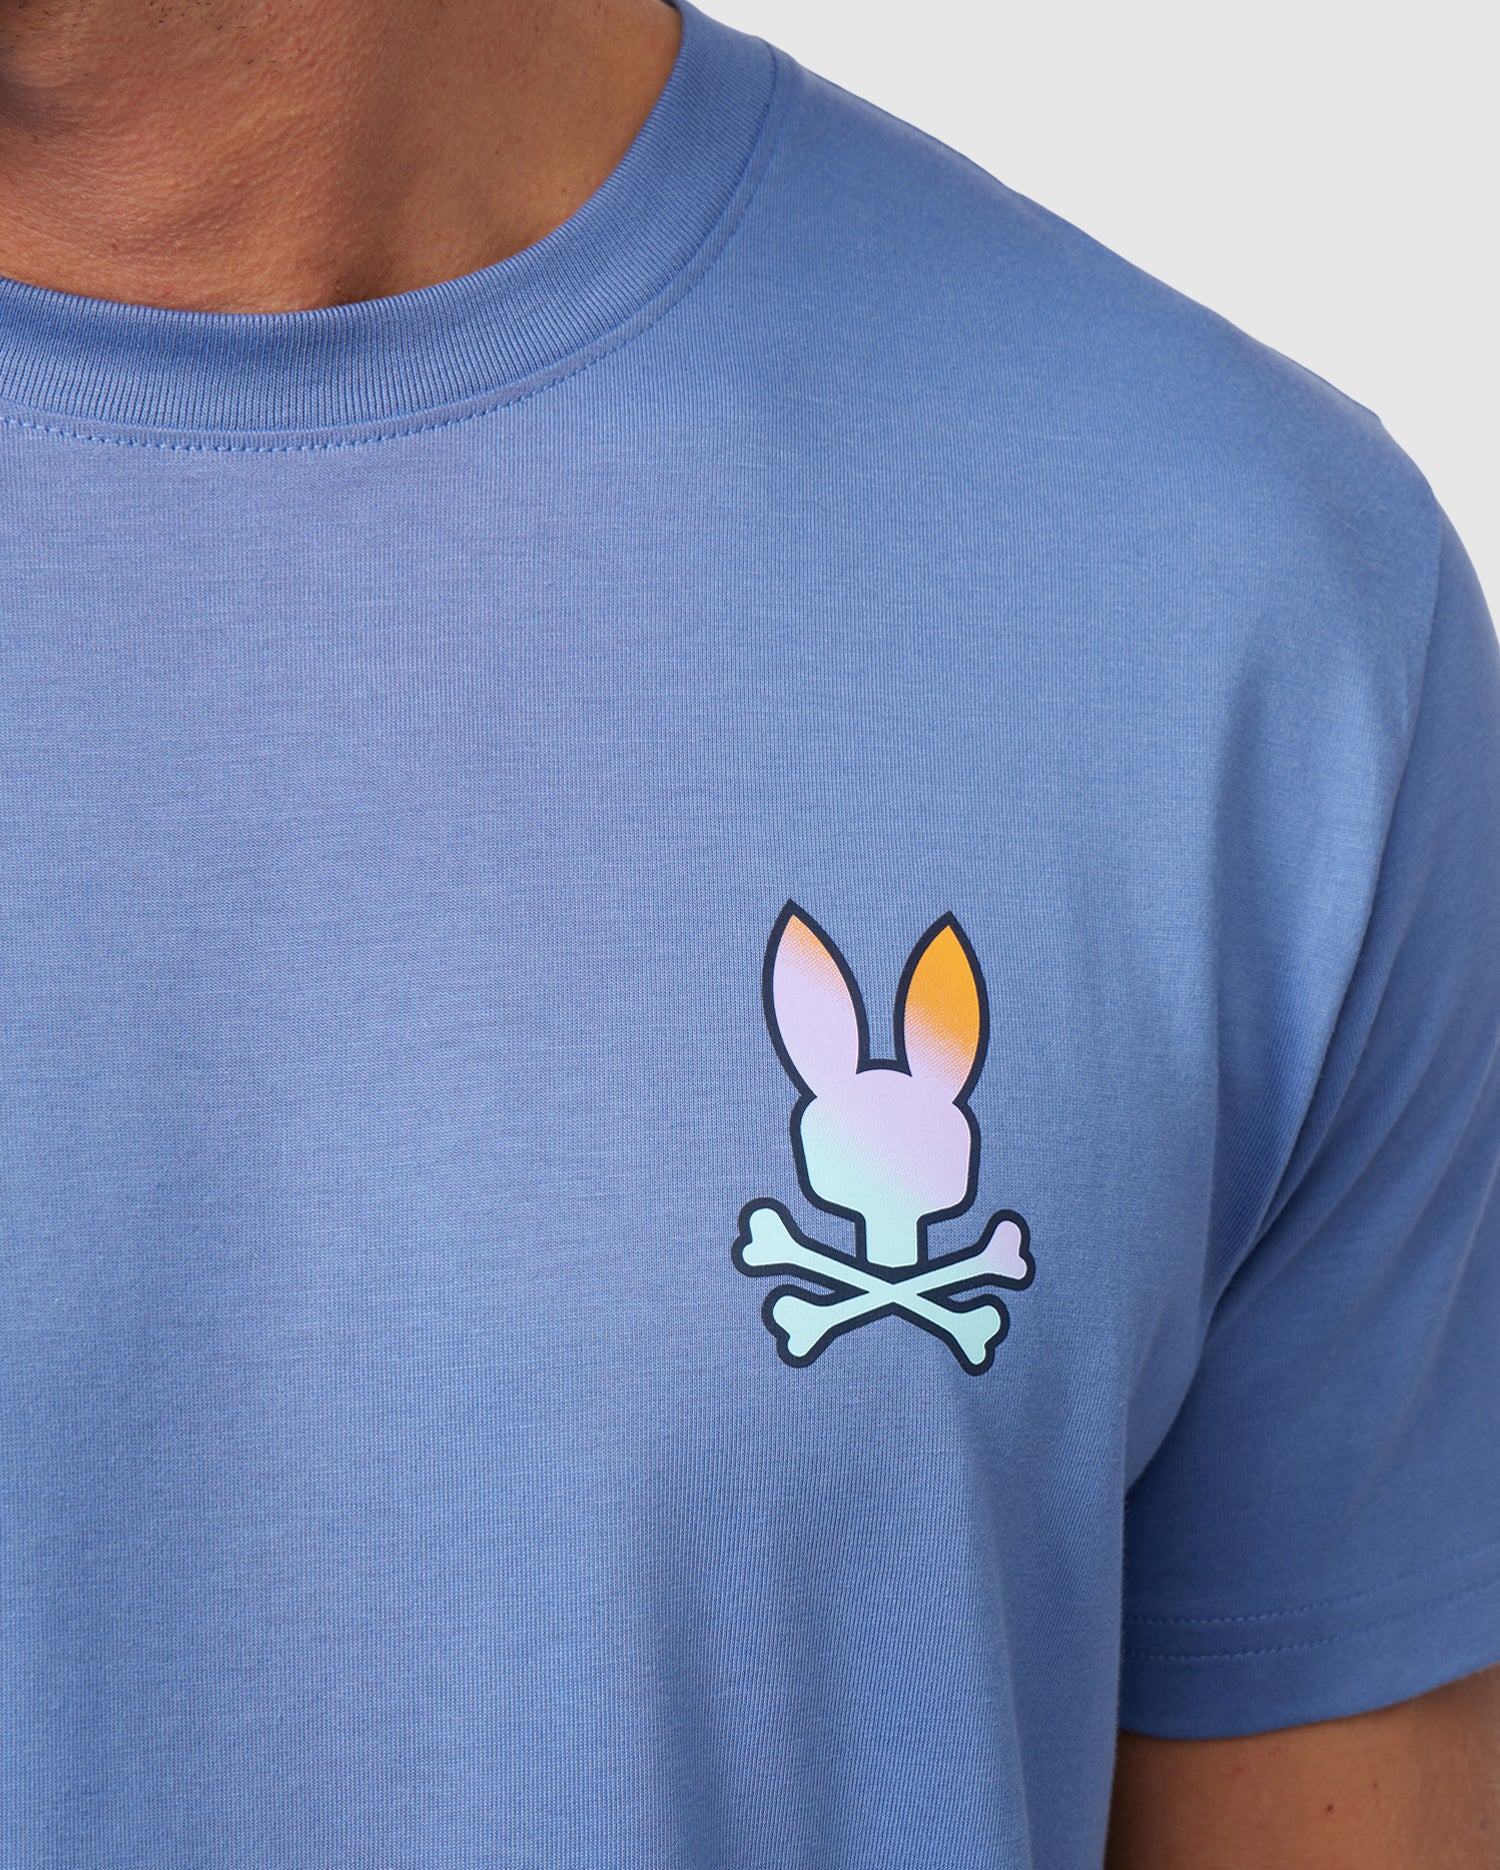 MENS LIGHT BLUE PALM SPRINGS BACK GRAPHIC TEE | PSYCHO BUNNY – Psycho Bunny